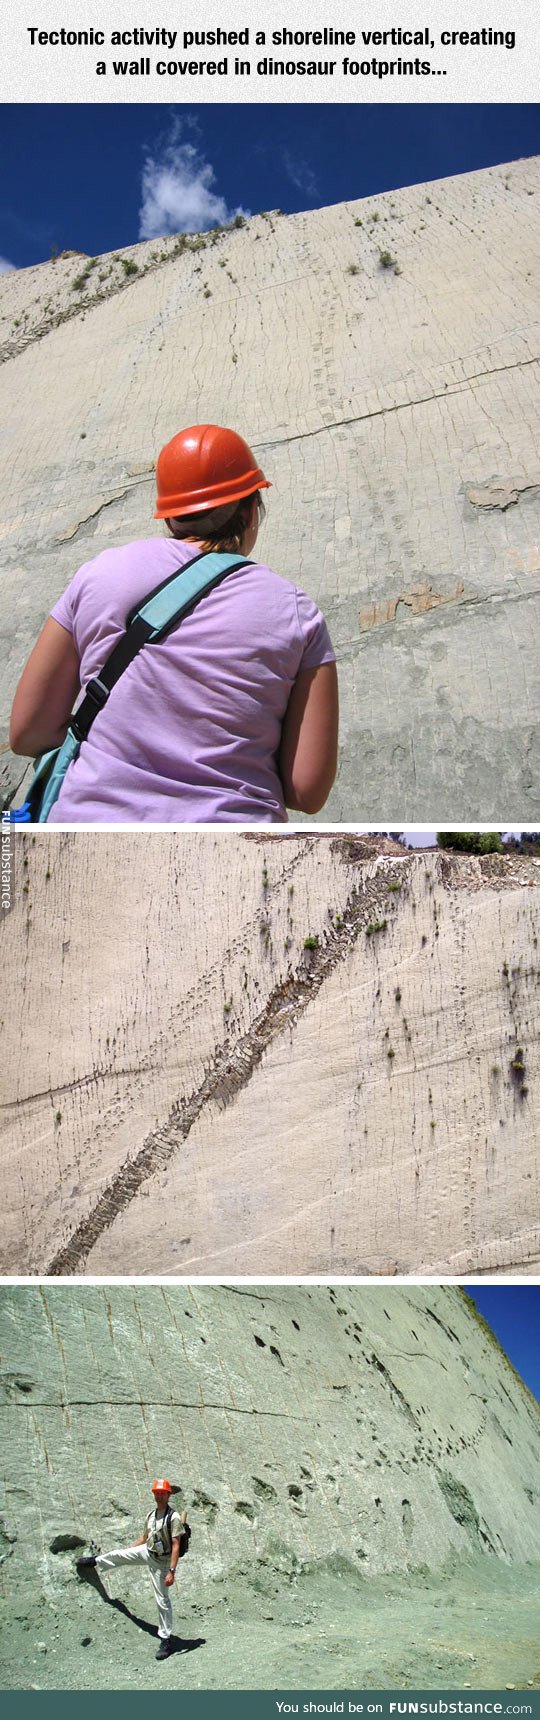 Wall covered in dinosaur footprints